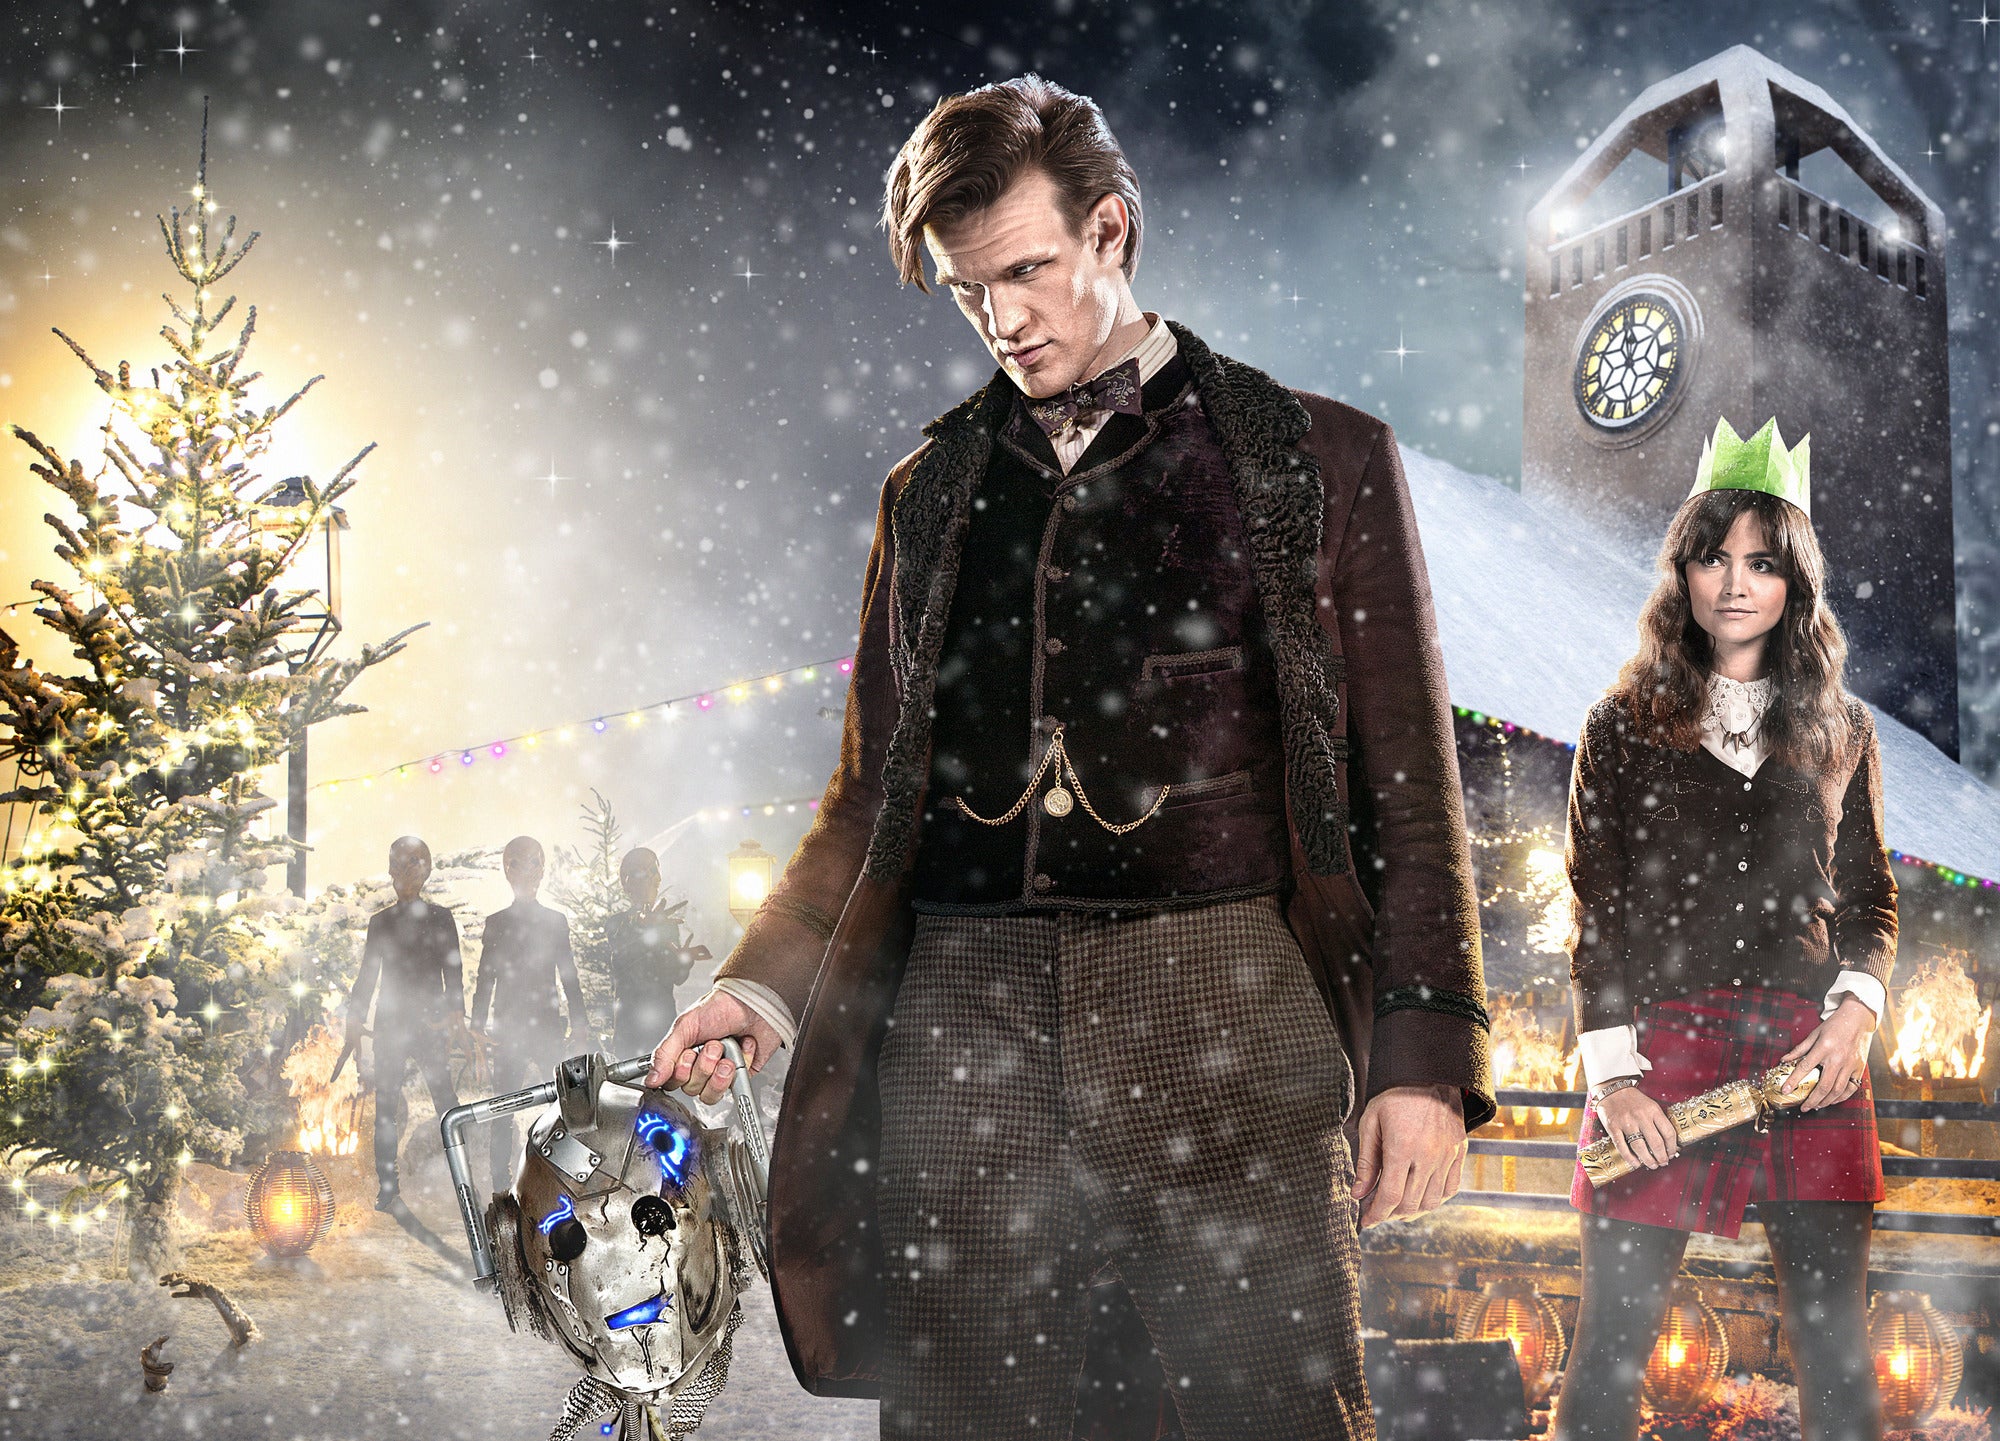 Matt Smith and Jenna Coleman in the Doctor Who Christmas special